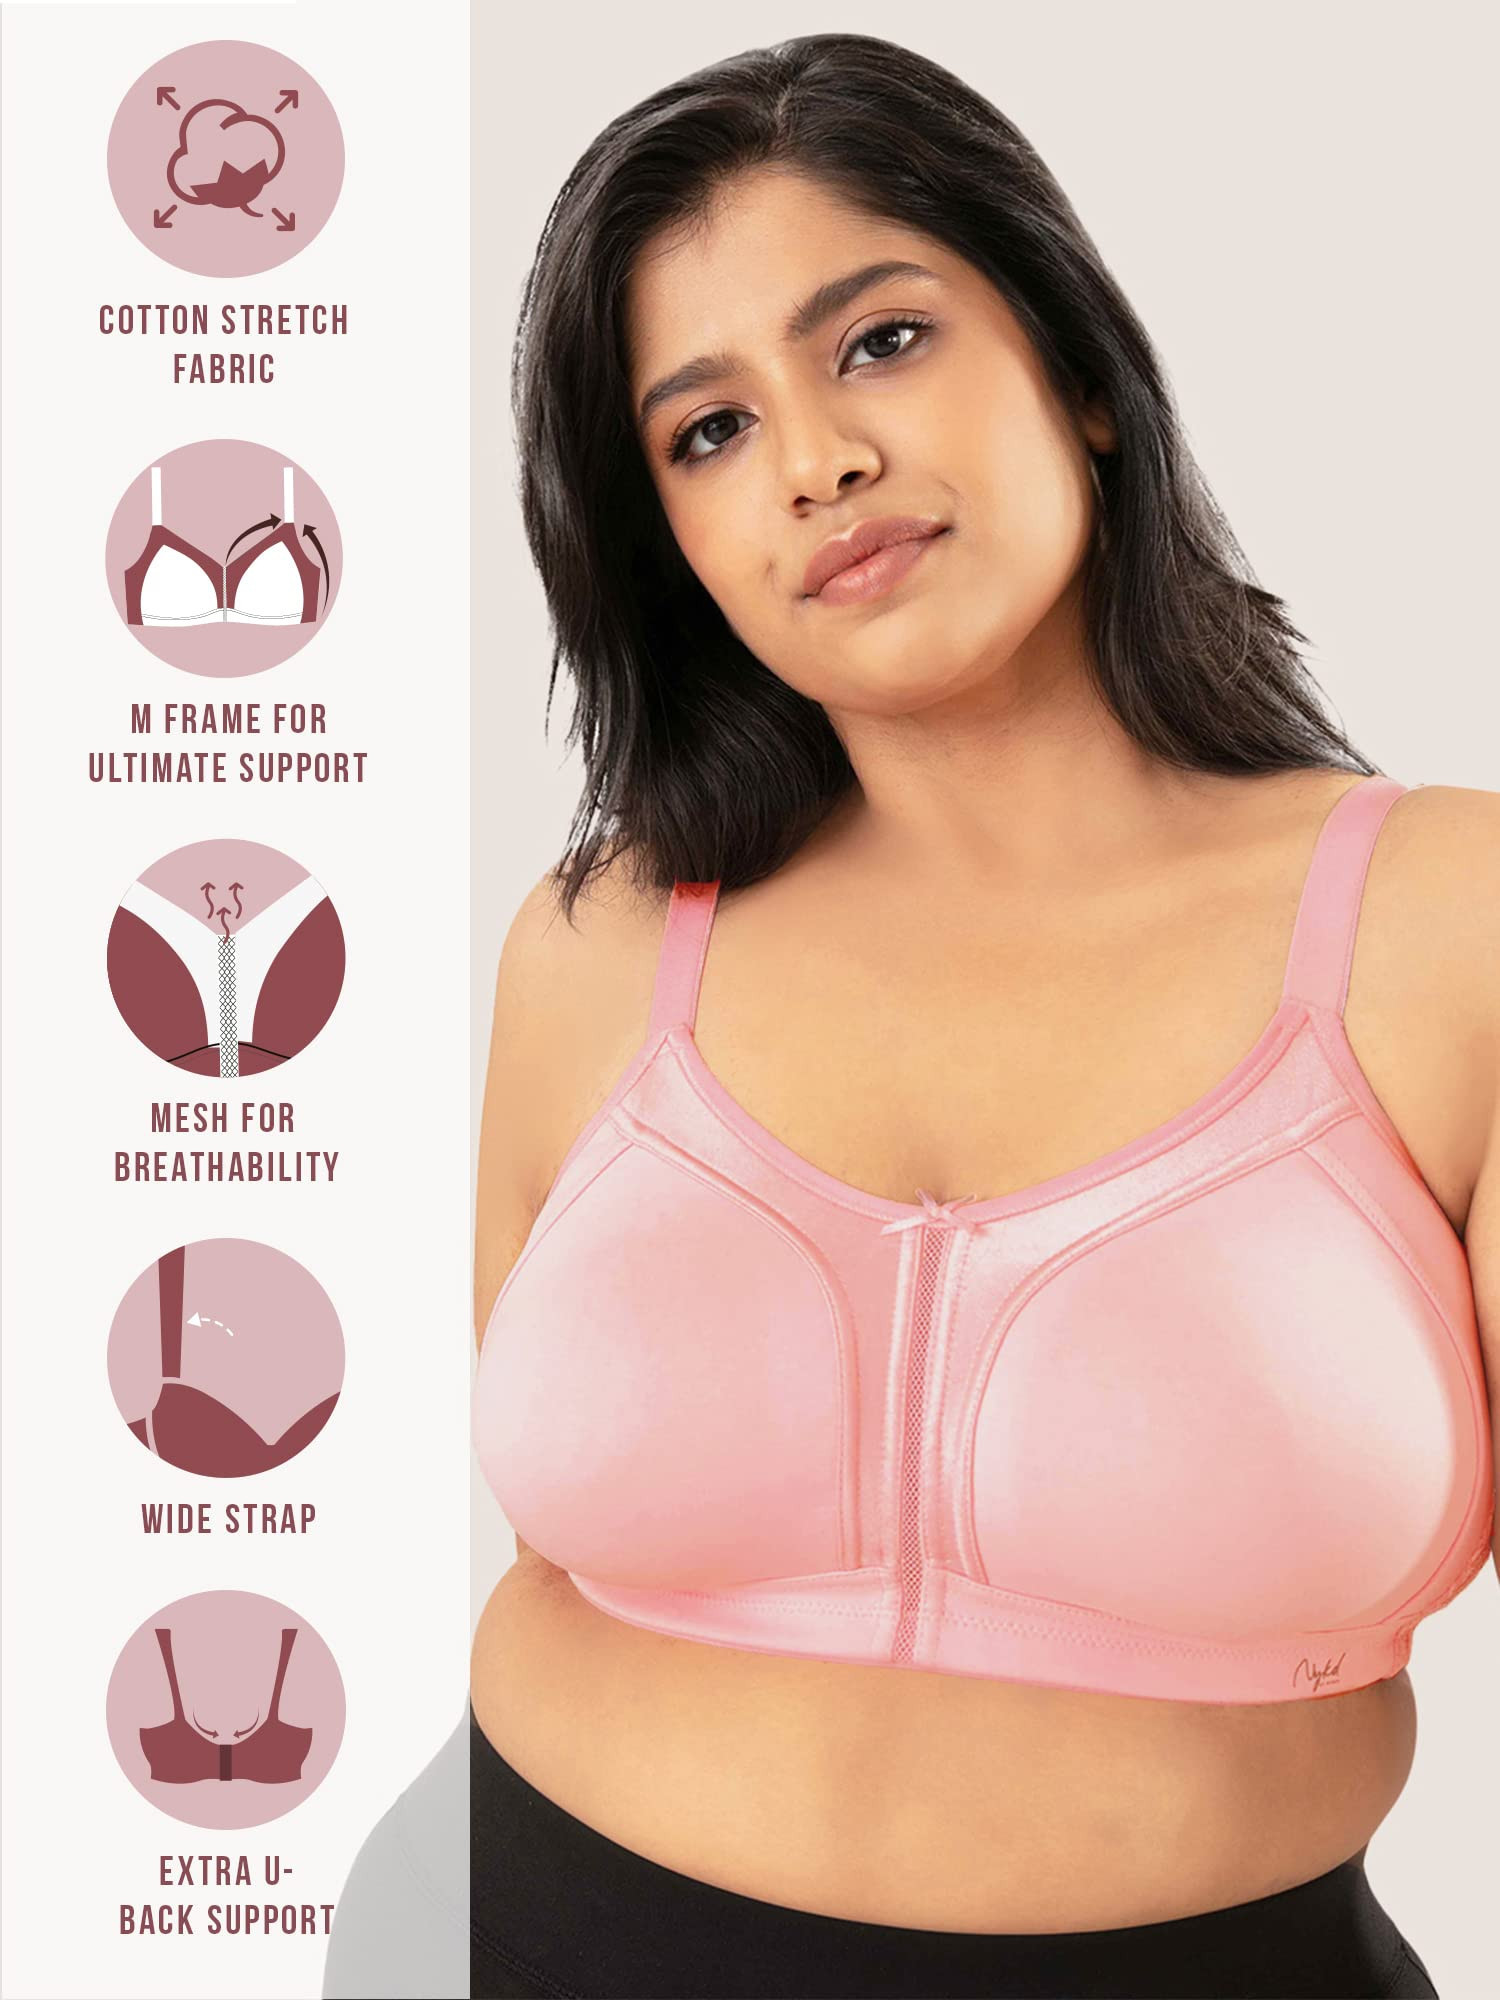 https://www.zebrs.com/uploads/zebrs/products/nykd-by-nykaa-womens-full-support-m-frame-heavy-bust-everyday-cotton-bra--non-padded--wireless--full-coverage-bra-nyb101-coral-32d-1nsize-32d-155571486853486_l.jpg